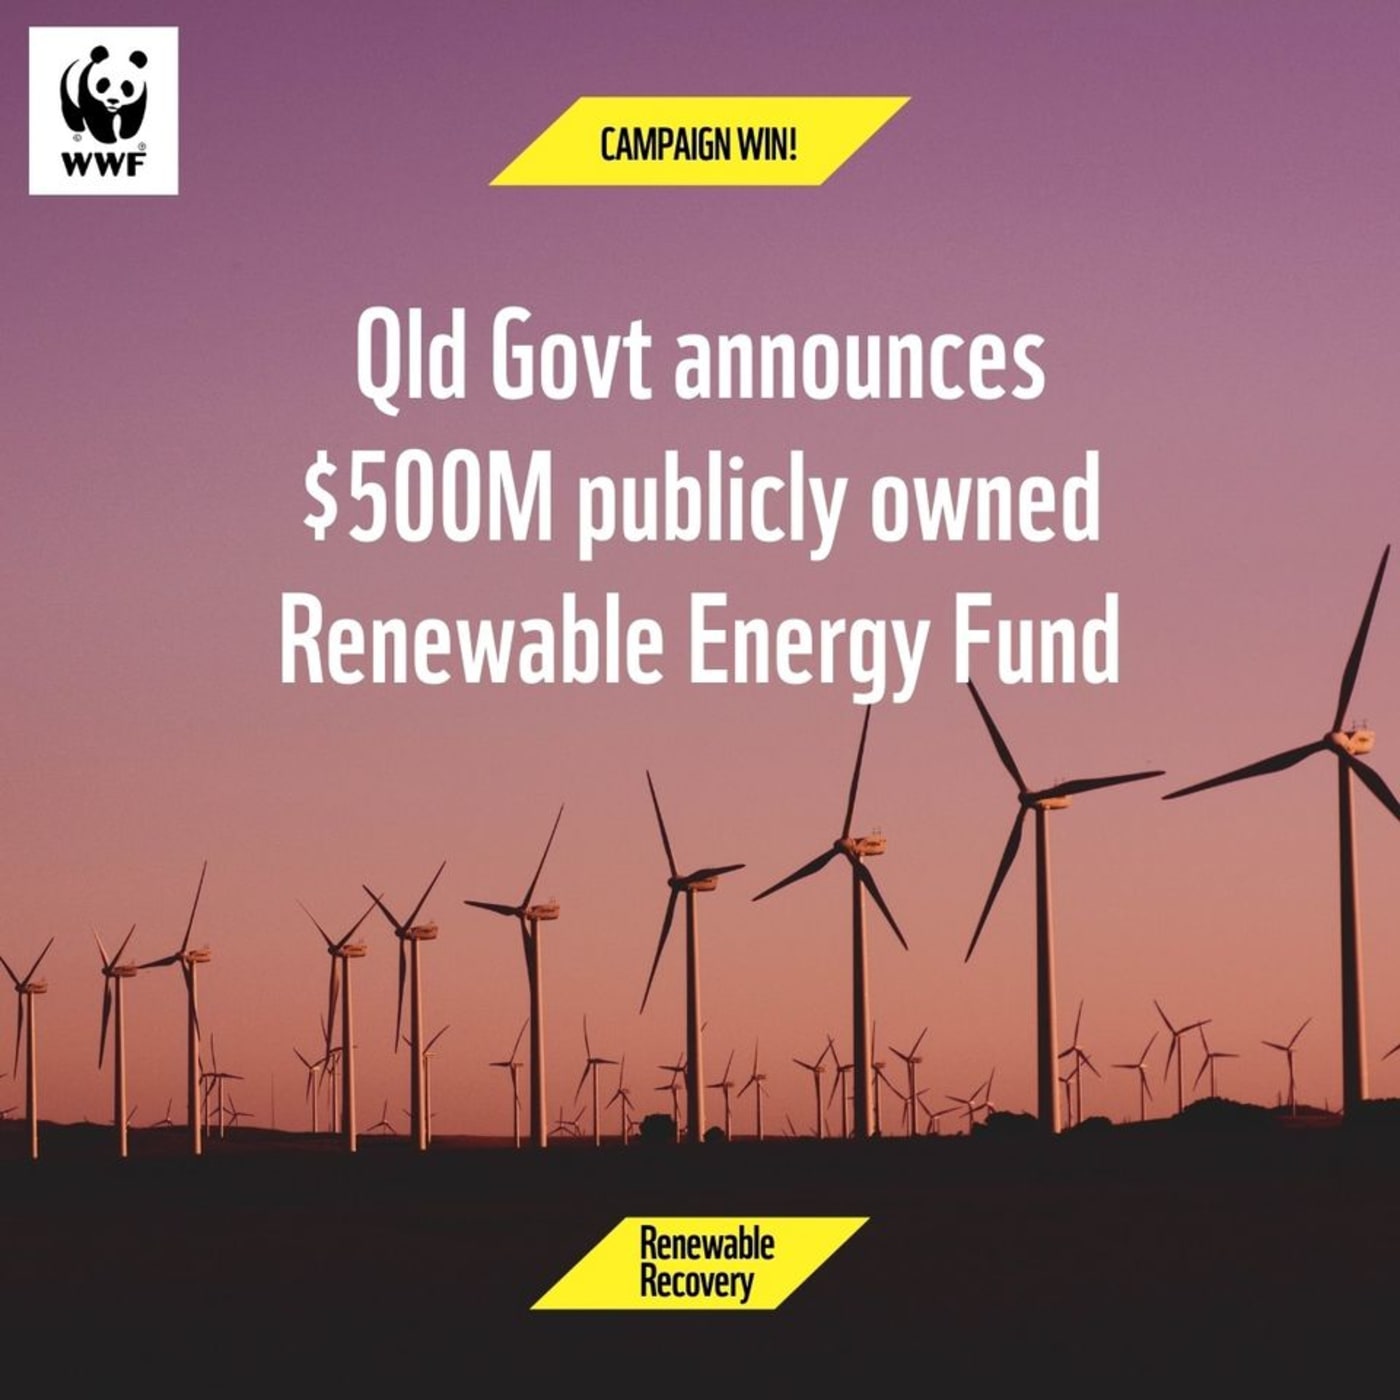 #RenewableRecovery Campaign win QLD